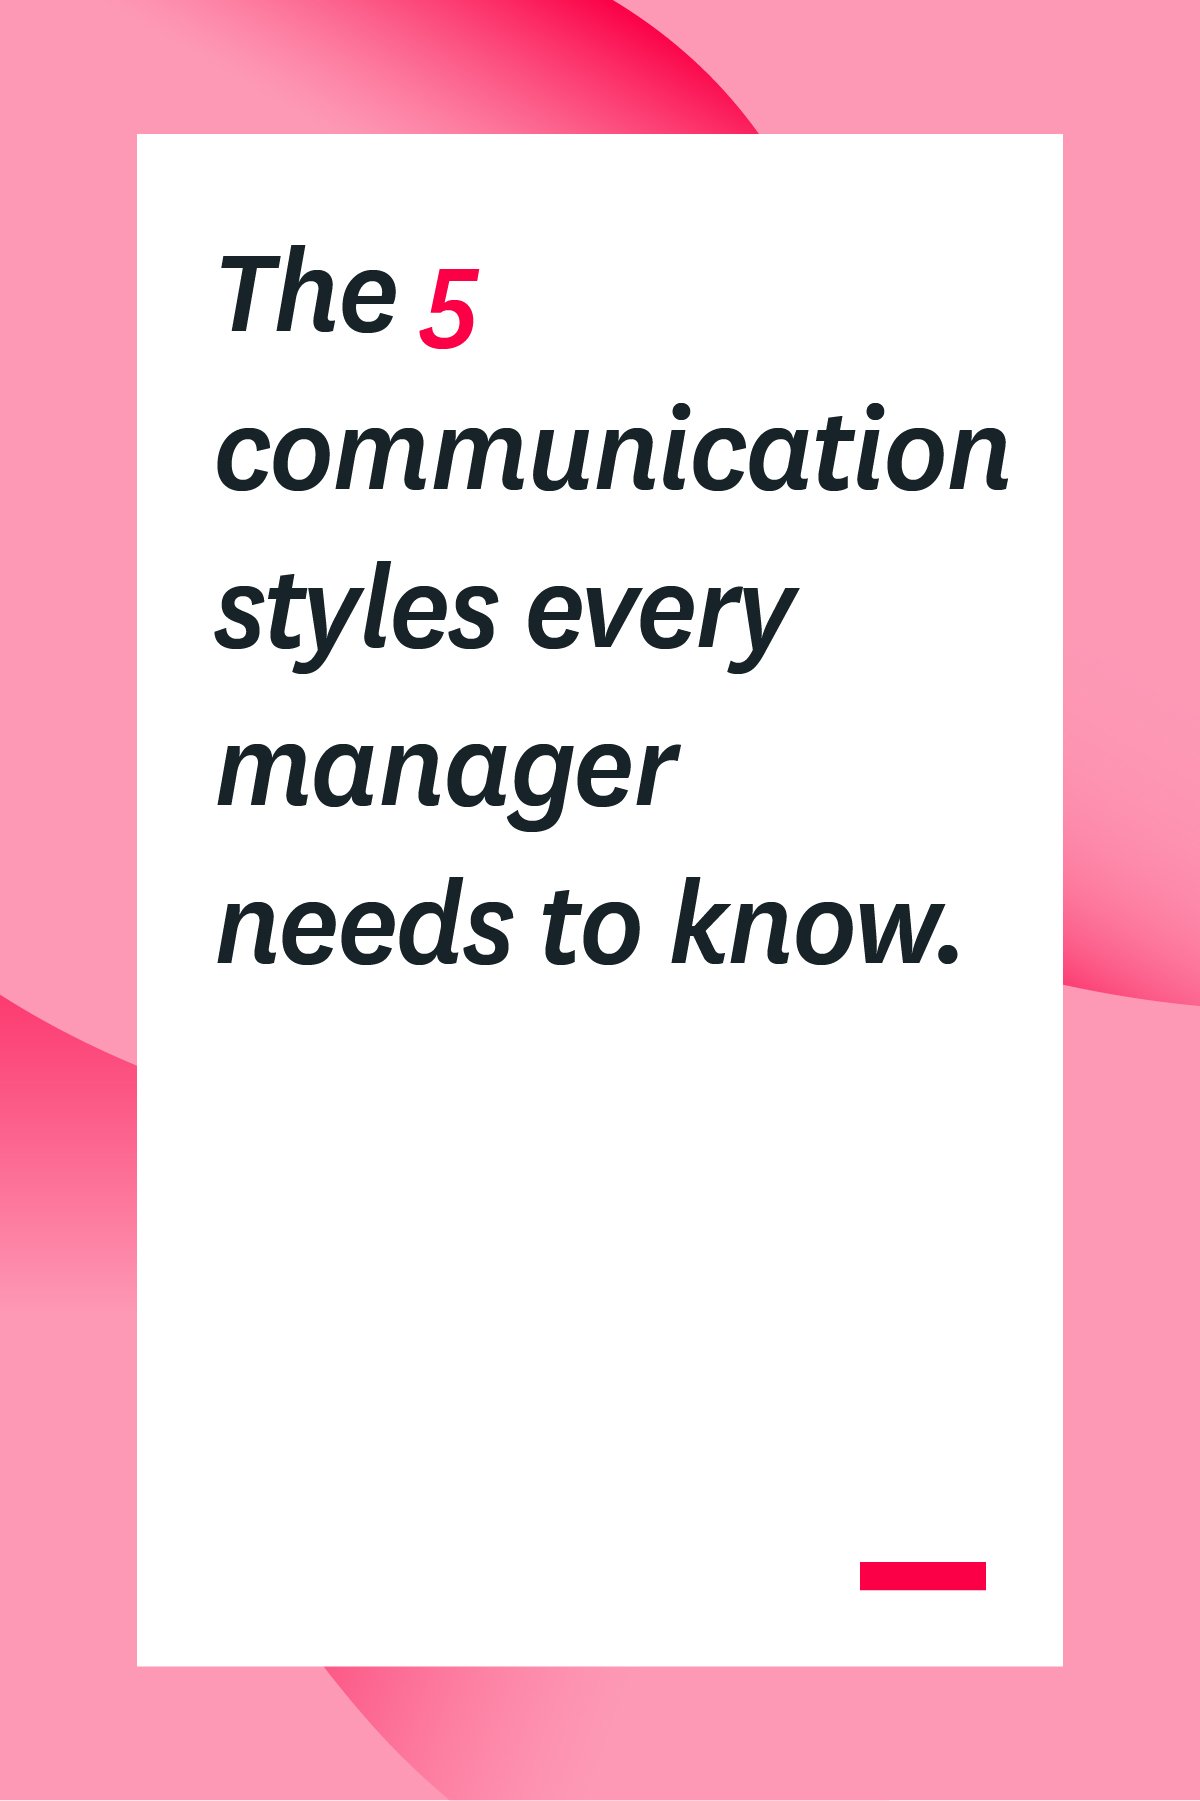 As a manger, you need to understand different communication styles if you want your team to be successful. This overview of the 5 communication styles your employee's may be using will help you communicate better and ultimately get more done. #workplace #communication #managertips